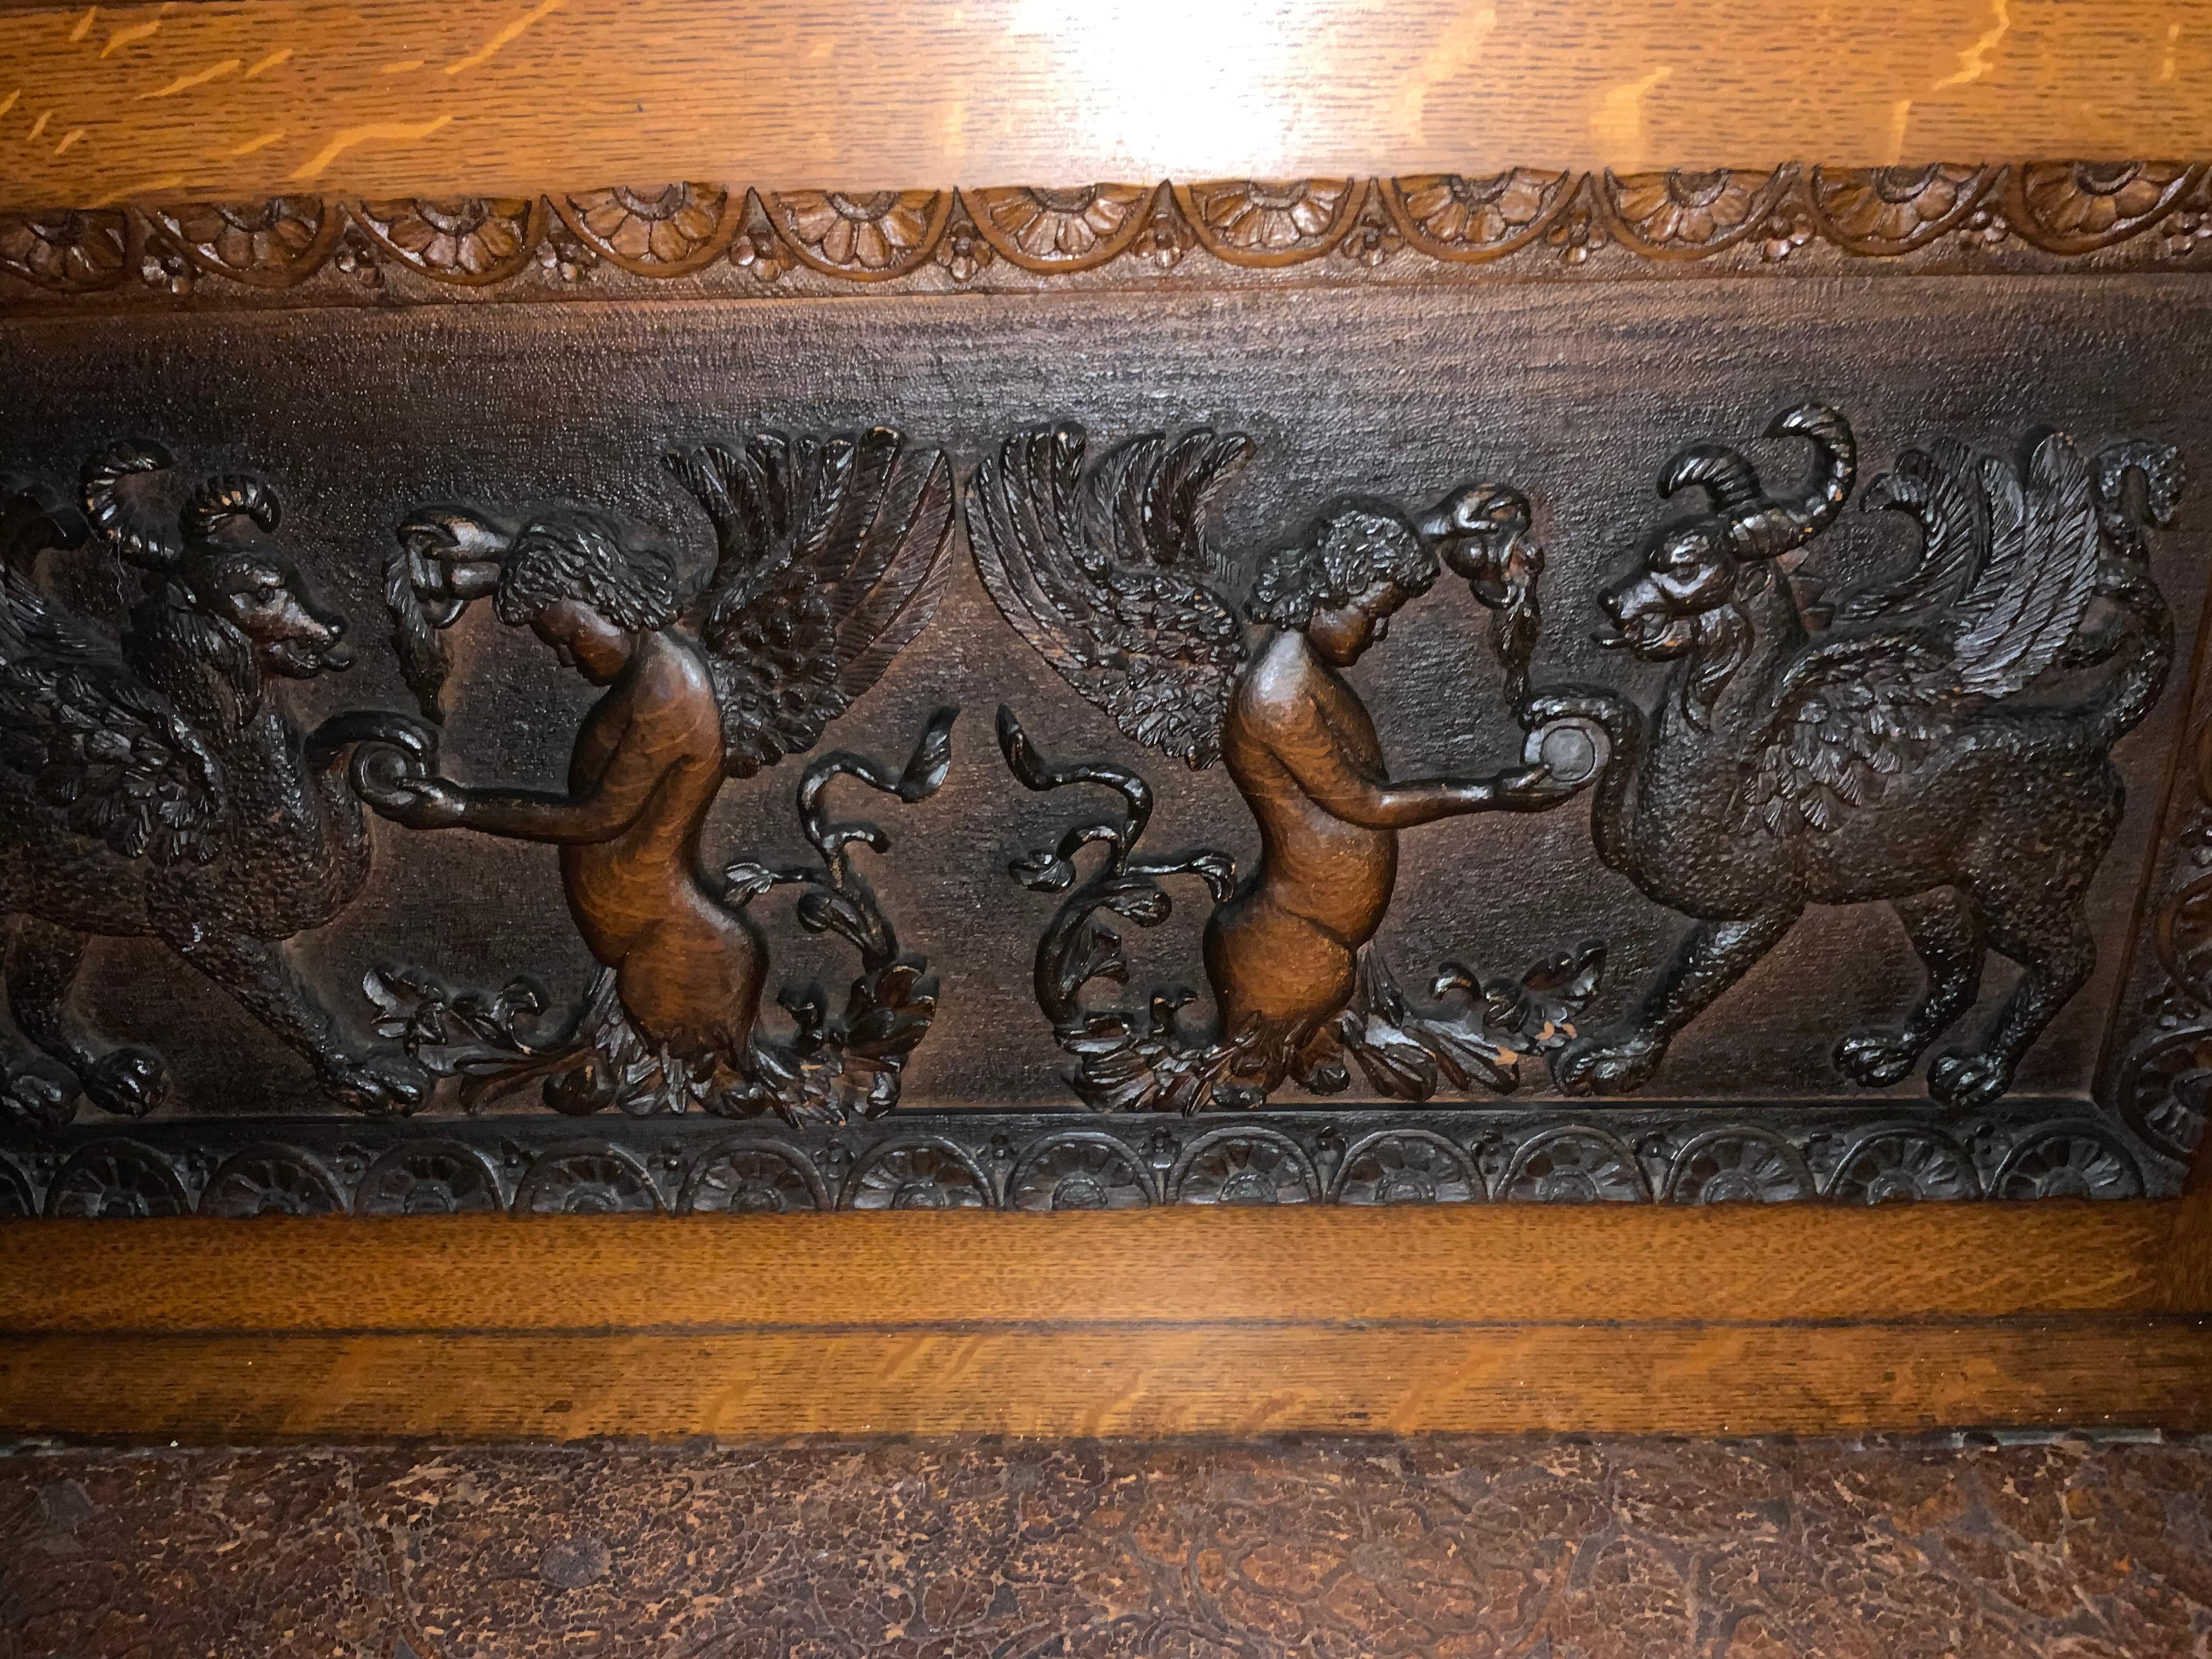 Handsome carved bench with superb carvings in oak. The arms are carved griffins with wings.
The seat is engraved leather that is original to the piece. The seat lifts up so the interior is great
For storage.